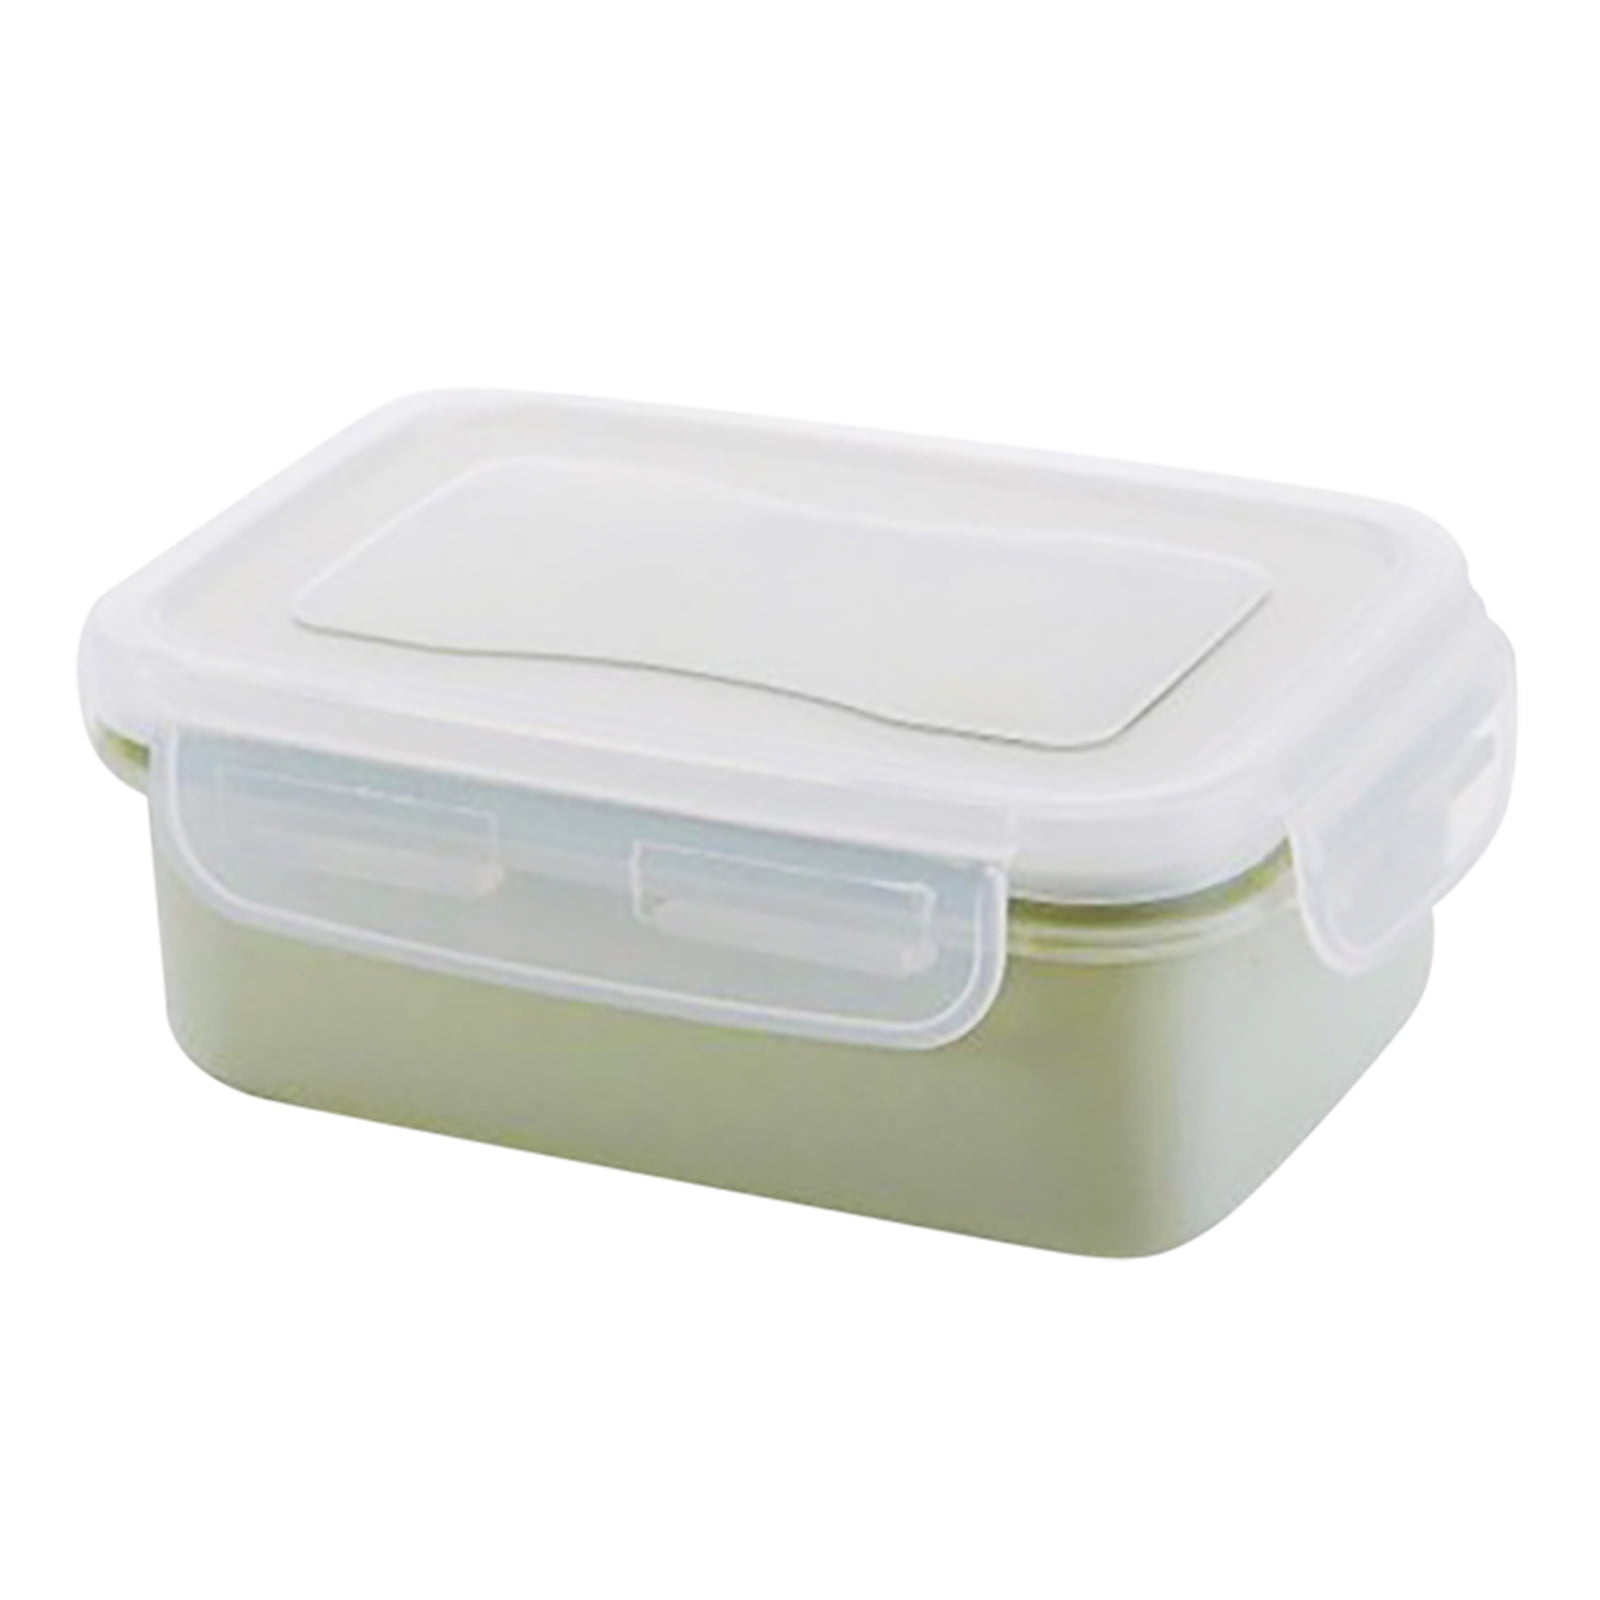 Airtight Jar Refrigerator Crisper Lunch Box Cereals Snack Storage Storage Jar Disposable Lunch Containers with Lids Organization Bins Lids Glass Meal Prep Container Sugar with - Walmart.com